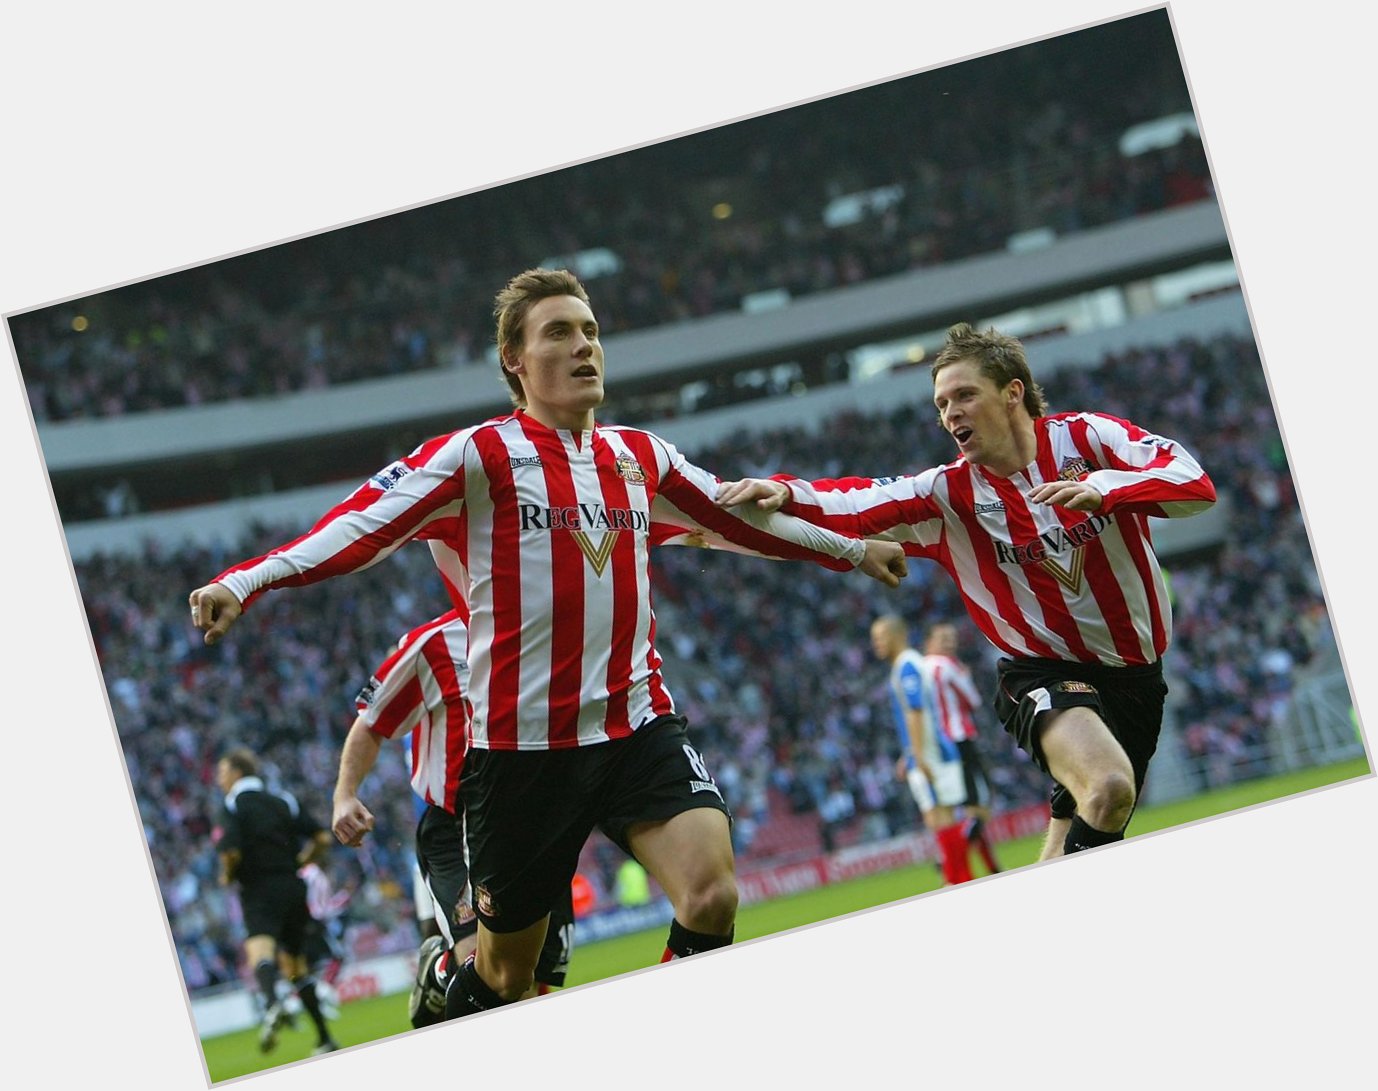 Happy 40th birthday to former midfielder Dean Whitehead! So consistent for us 